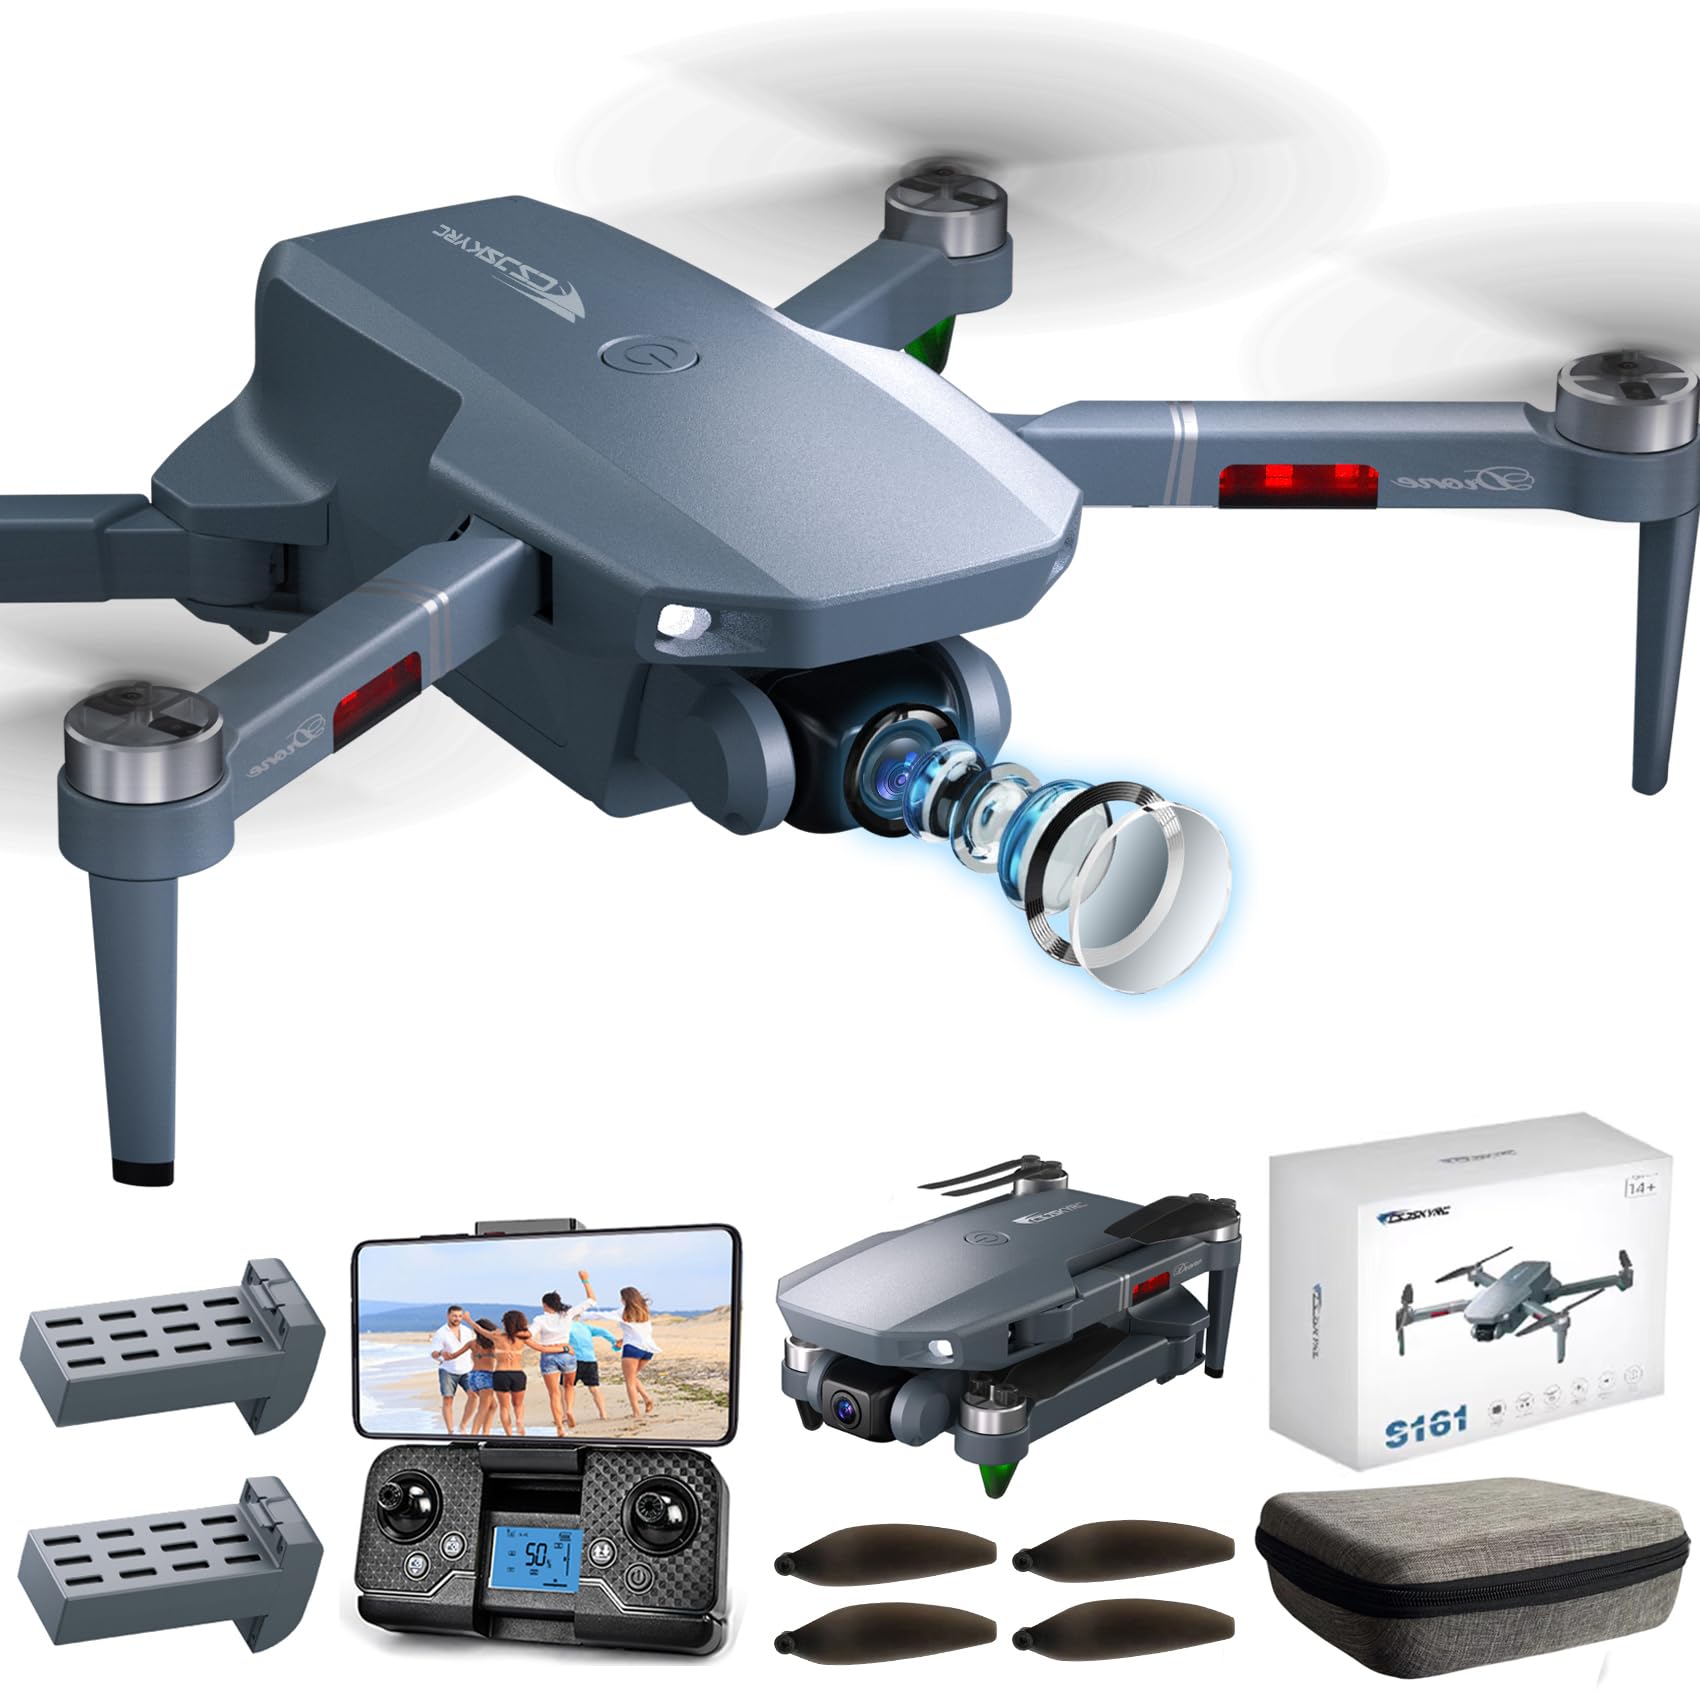 Foldable Drone Kit for Adults Beginners and Kids WIFI RC Quadcopter Remote Control Long Range FPV Airplanes 1080P Camera with 2 Batteries,Advanced Brushless Motors, Video Transmission, Gestures Selfie